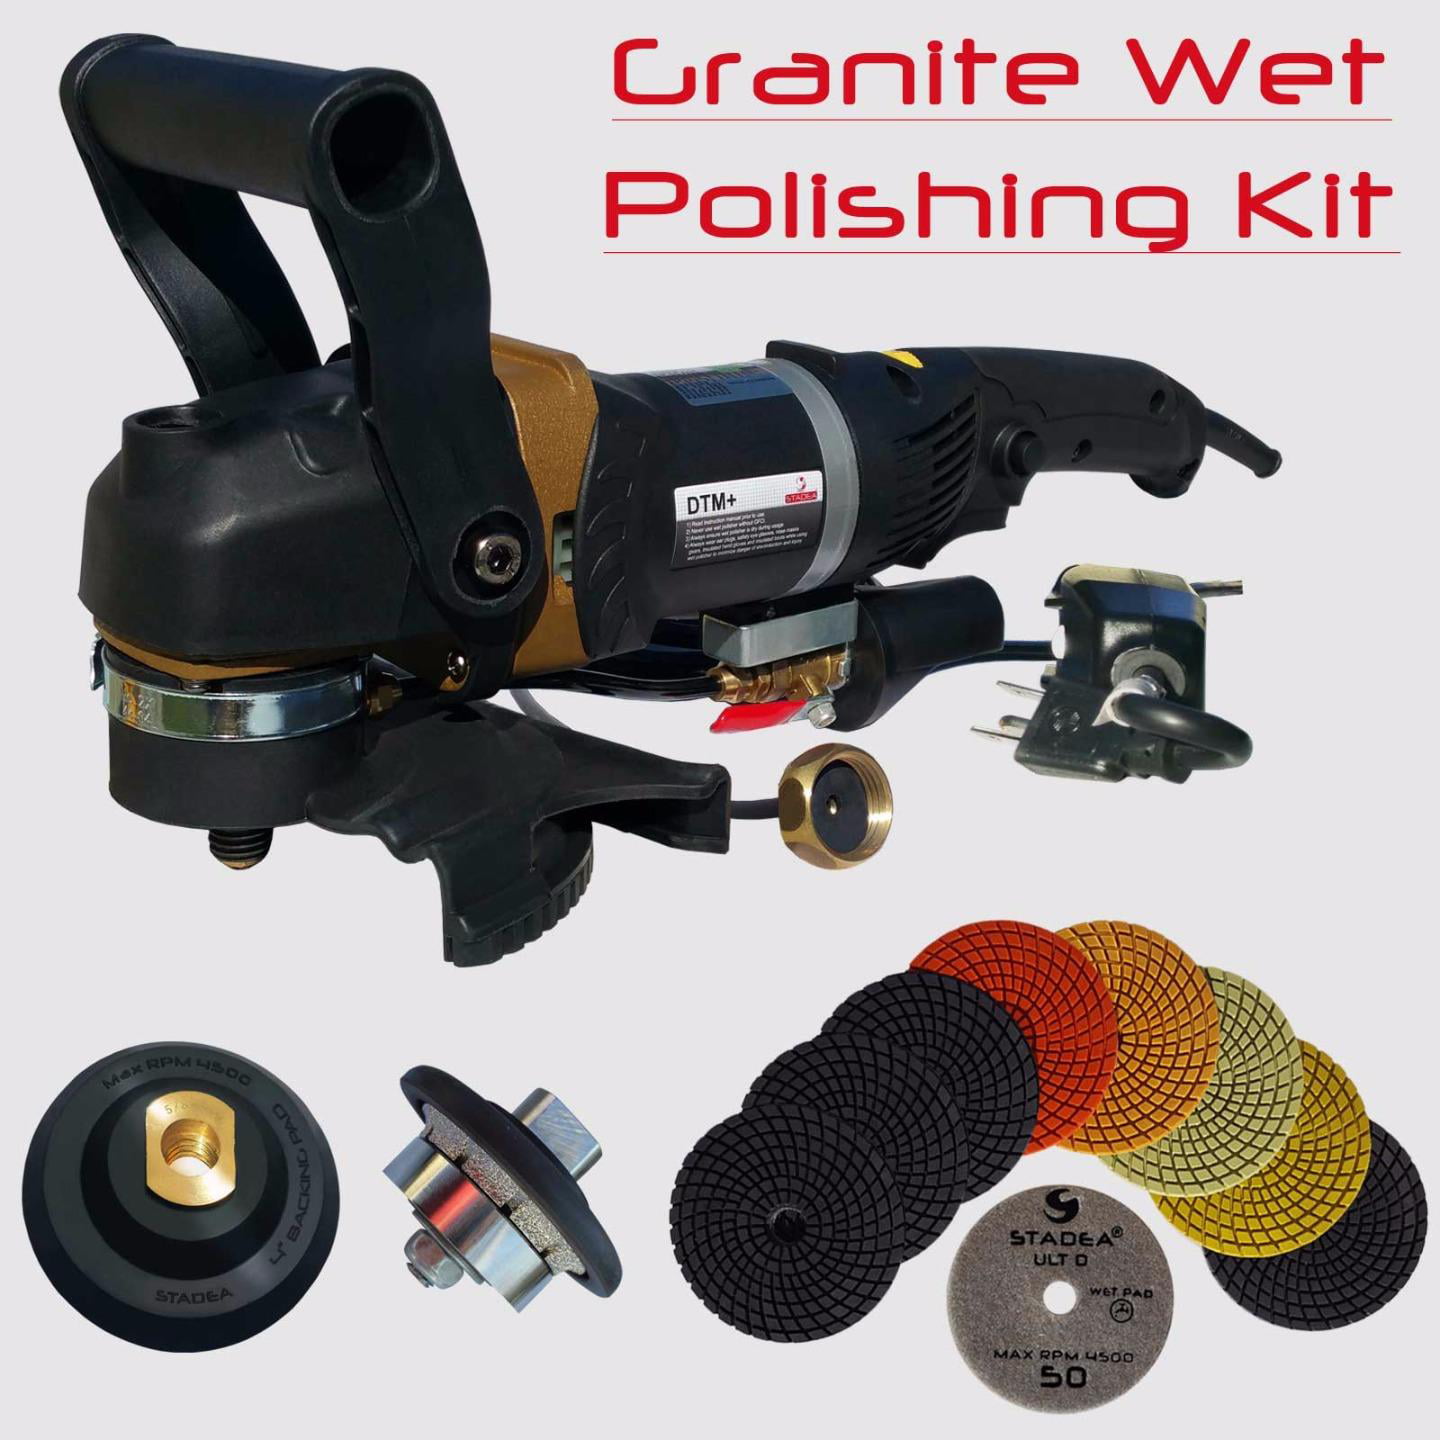 Wet Polisher Grinder stone cutter Lapidary Saw 23 Pad Blade floor Granite Cement 